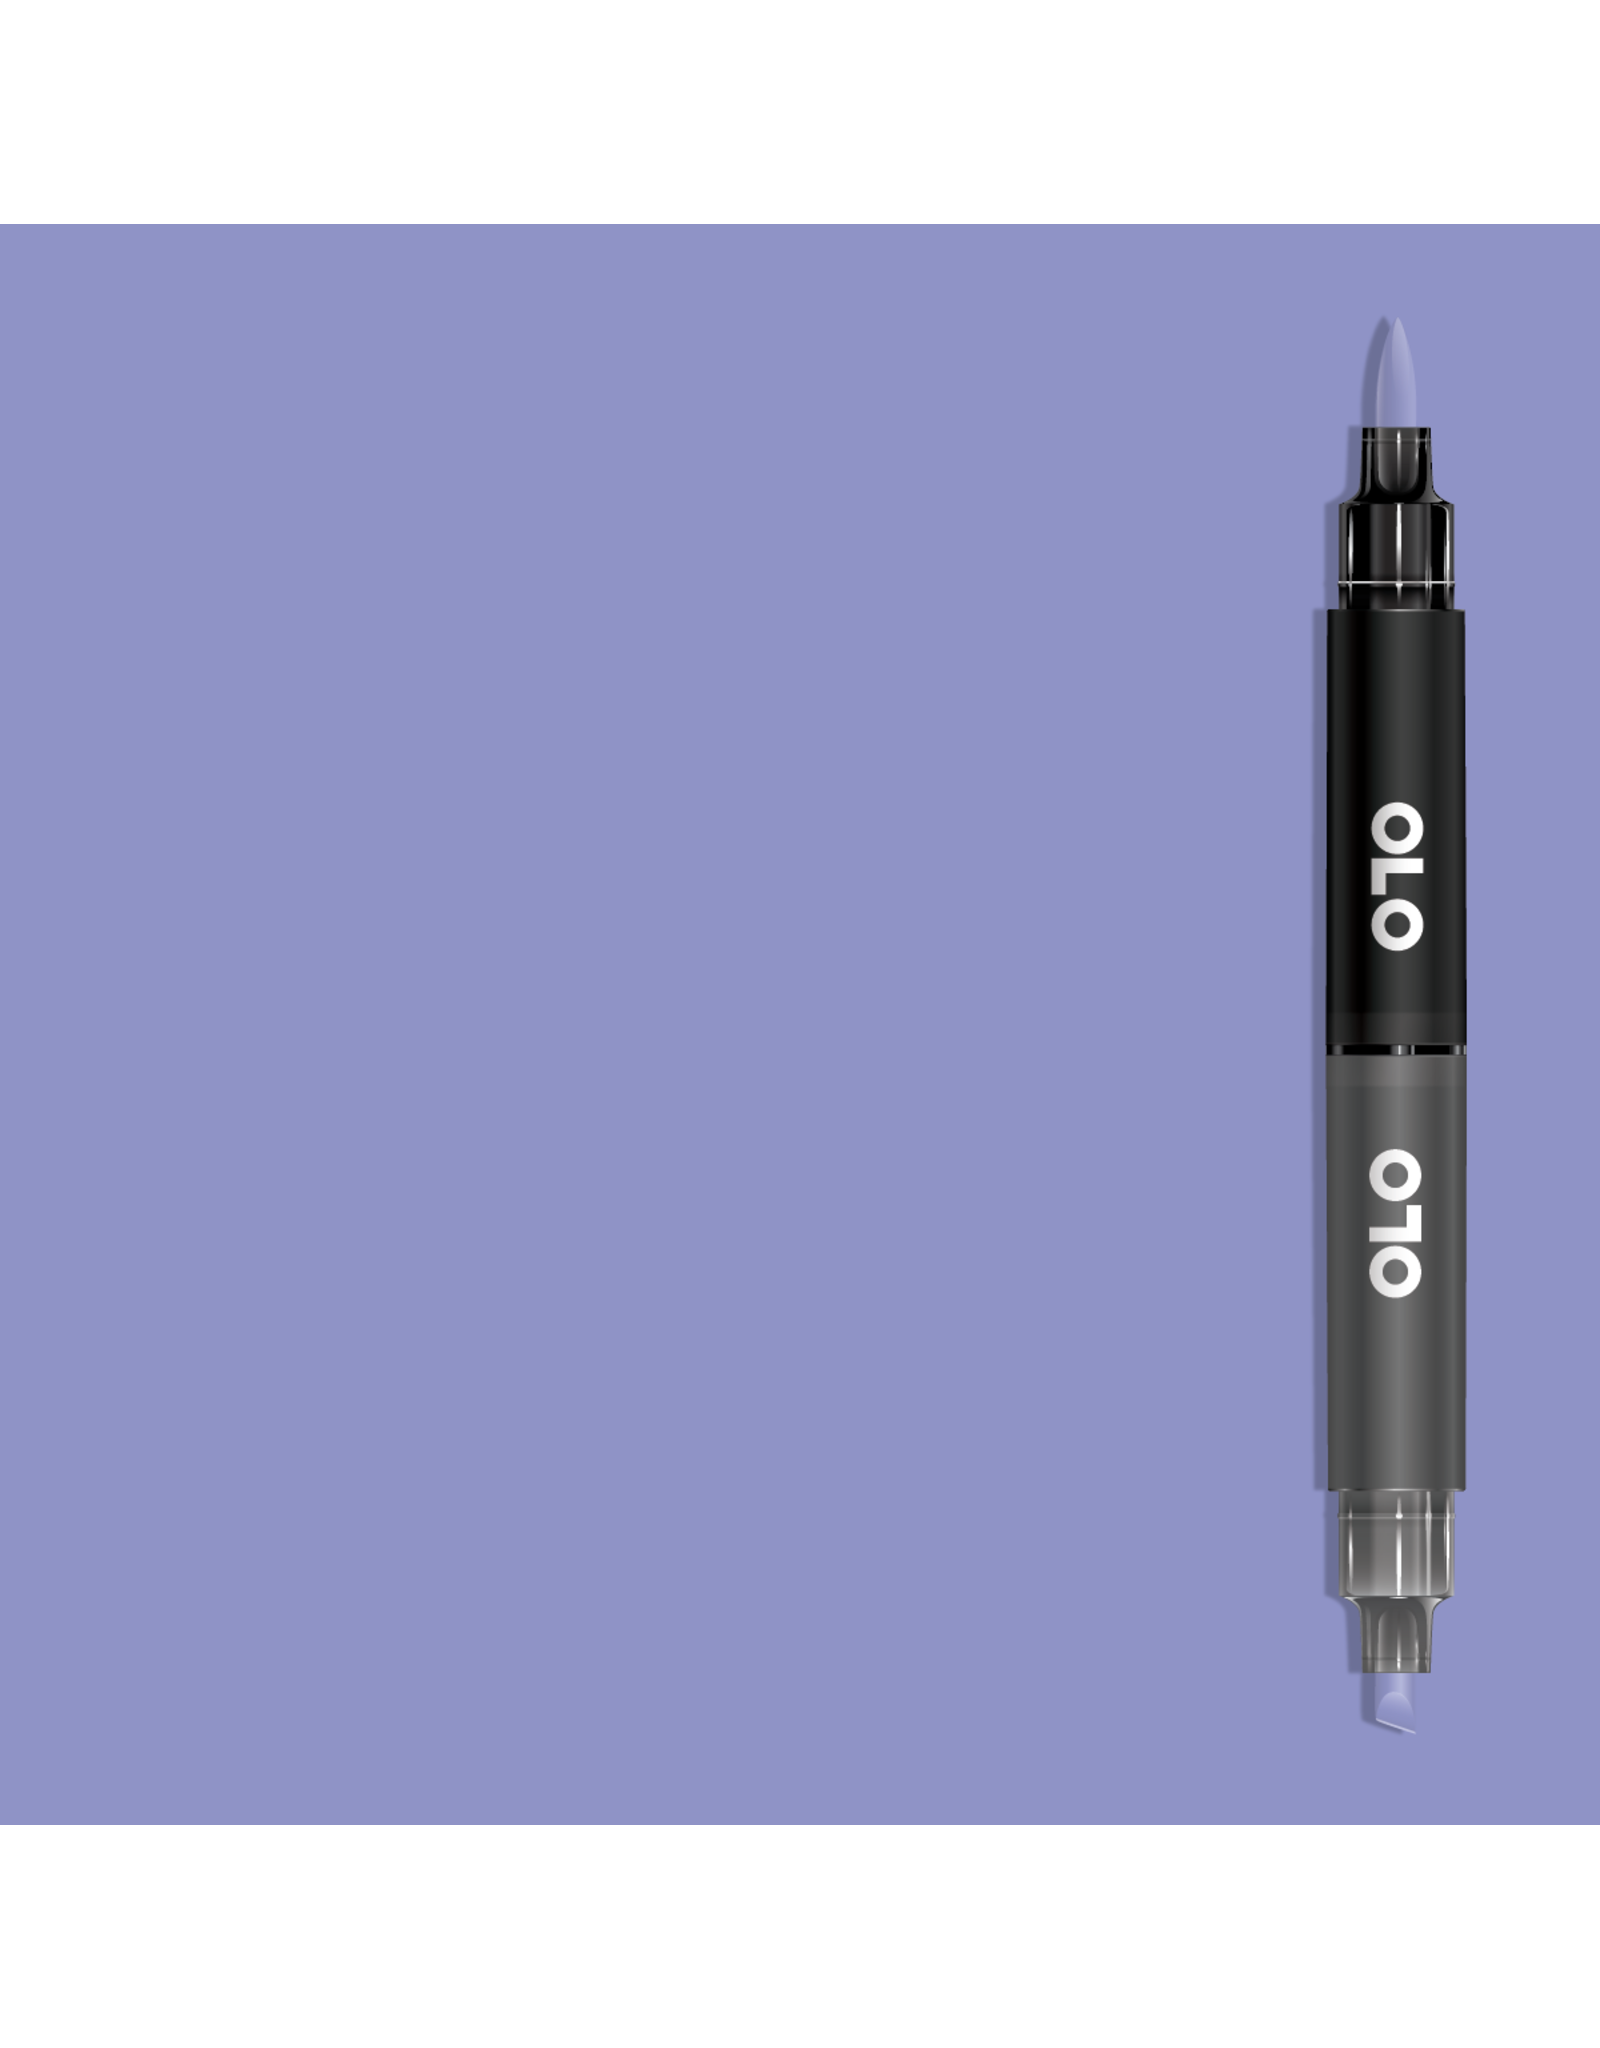 CLEARANCE OLO Marker, BV2.2 Periwinkle